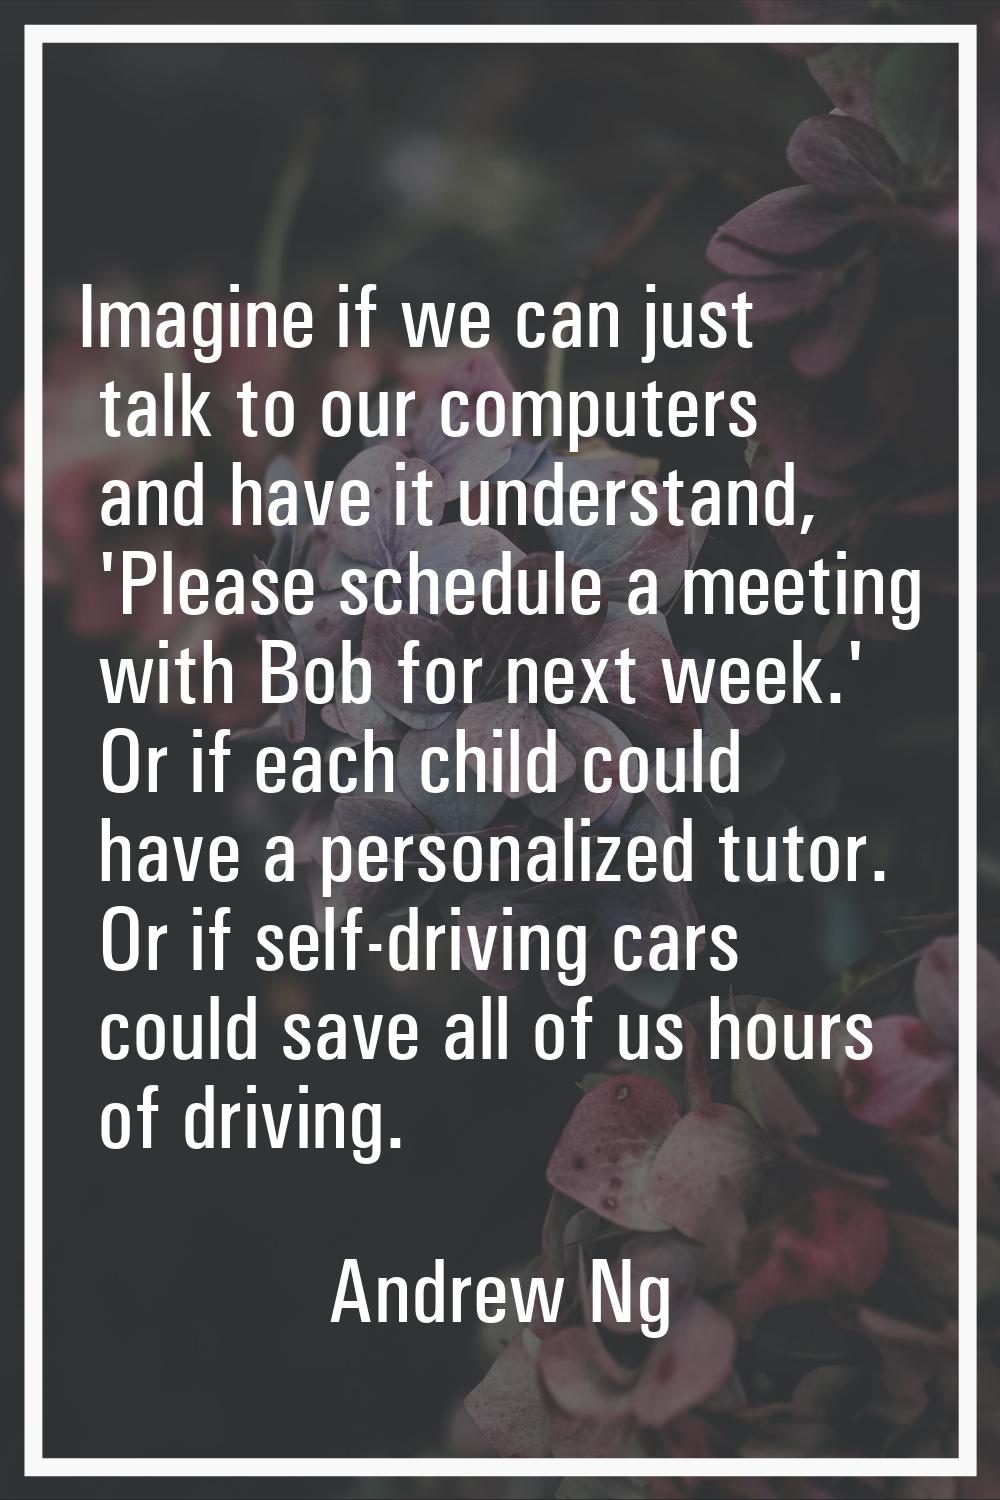 Imagine if we can just talk to our computers and have it understand, 'Please schedule a meeting wit